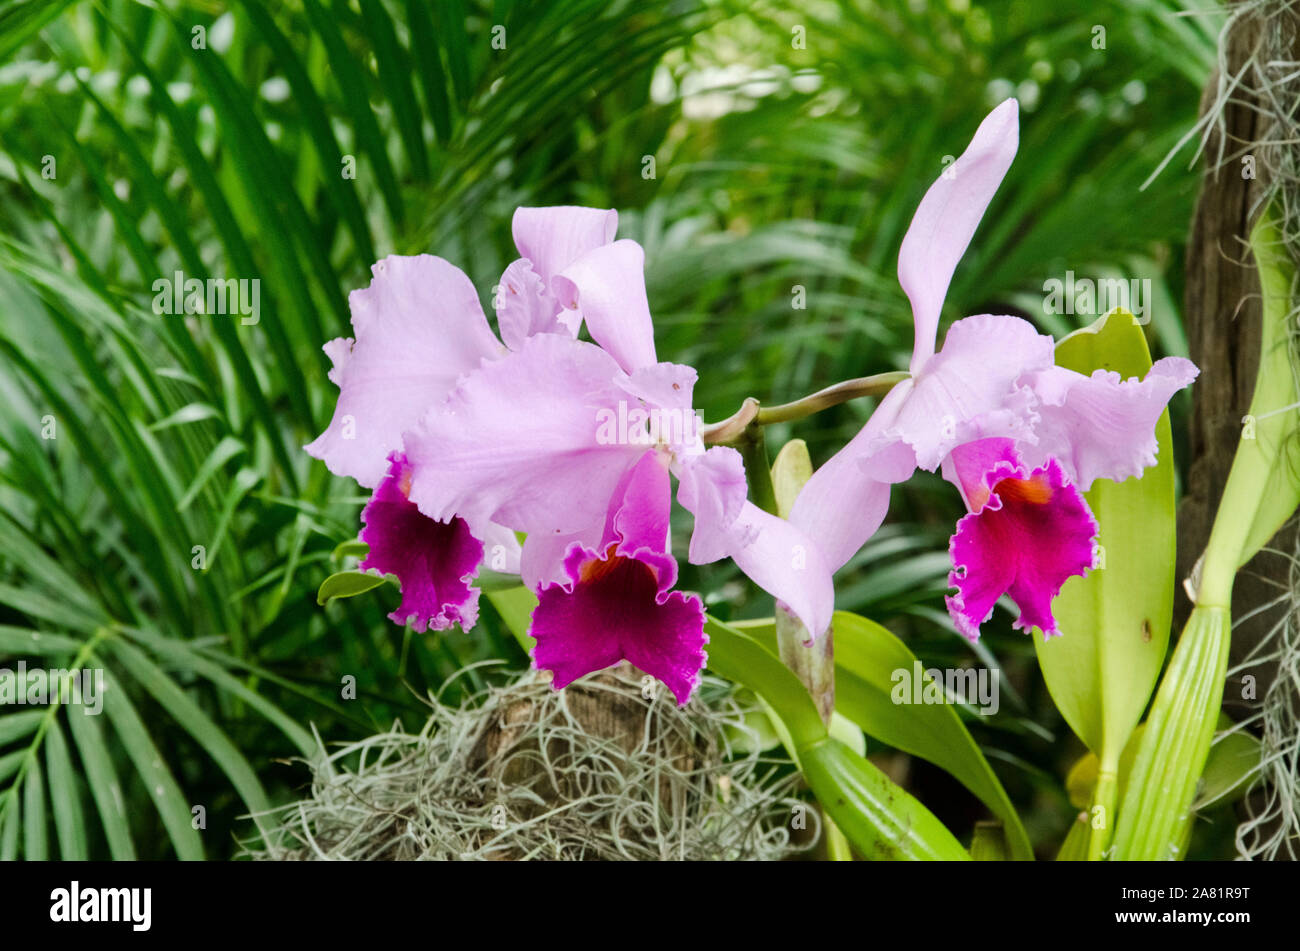 Cattleya Trianae orchid, a beautiful tropical flower in a natural environment Stock Photo